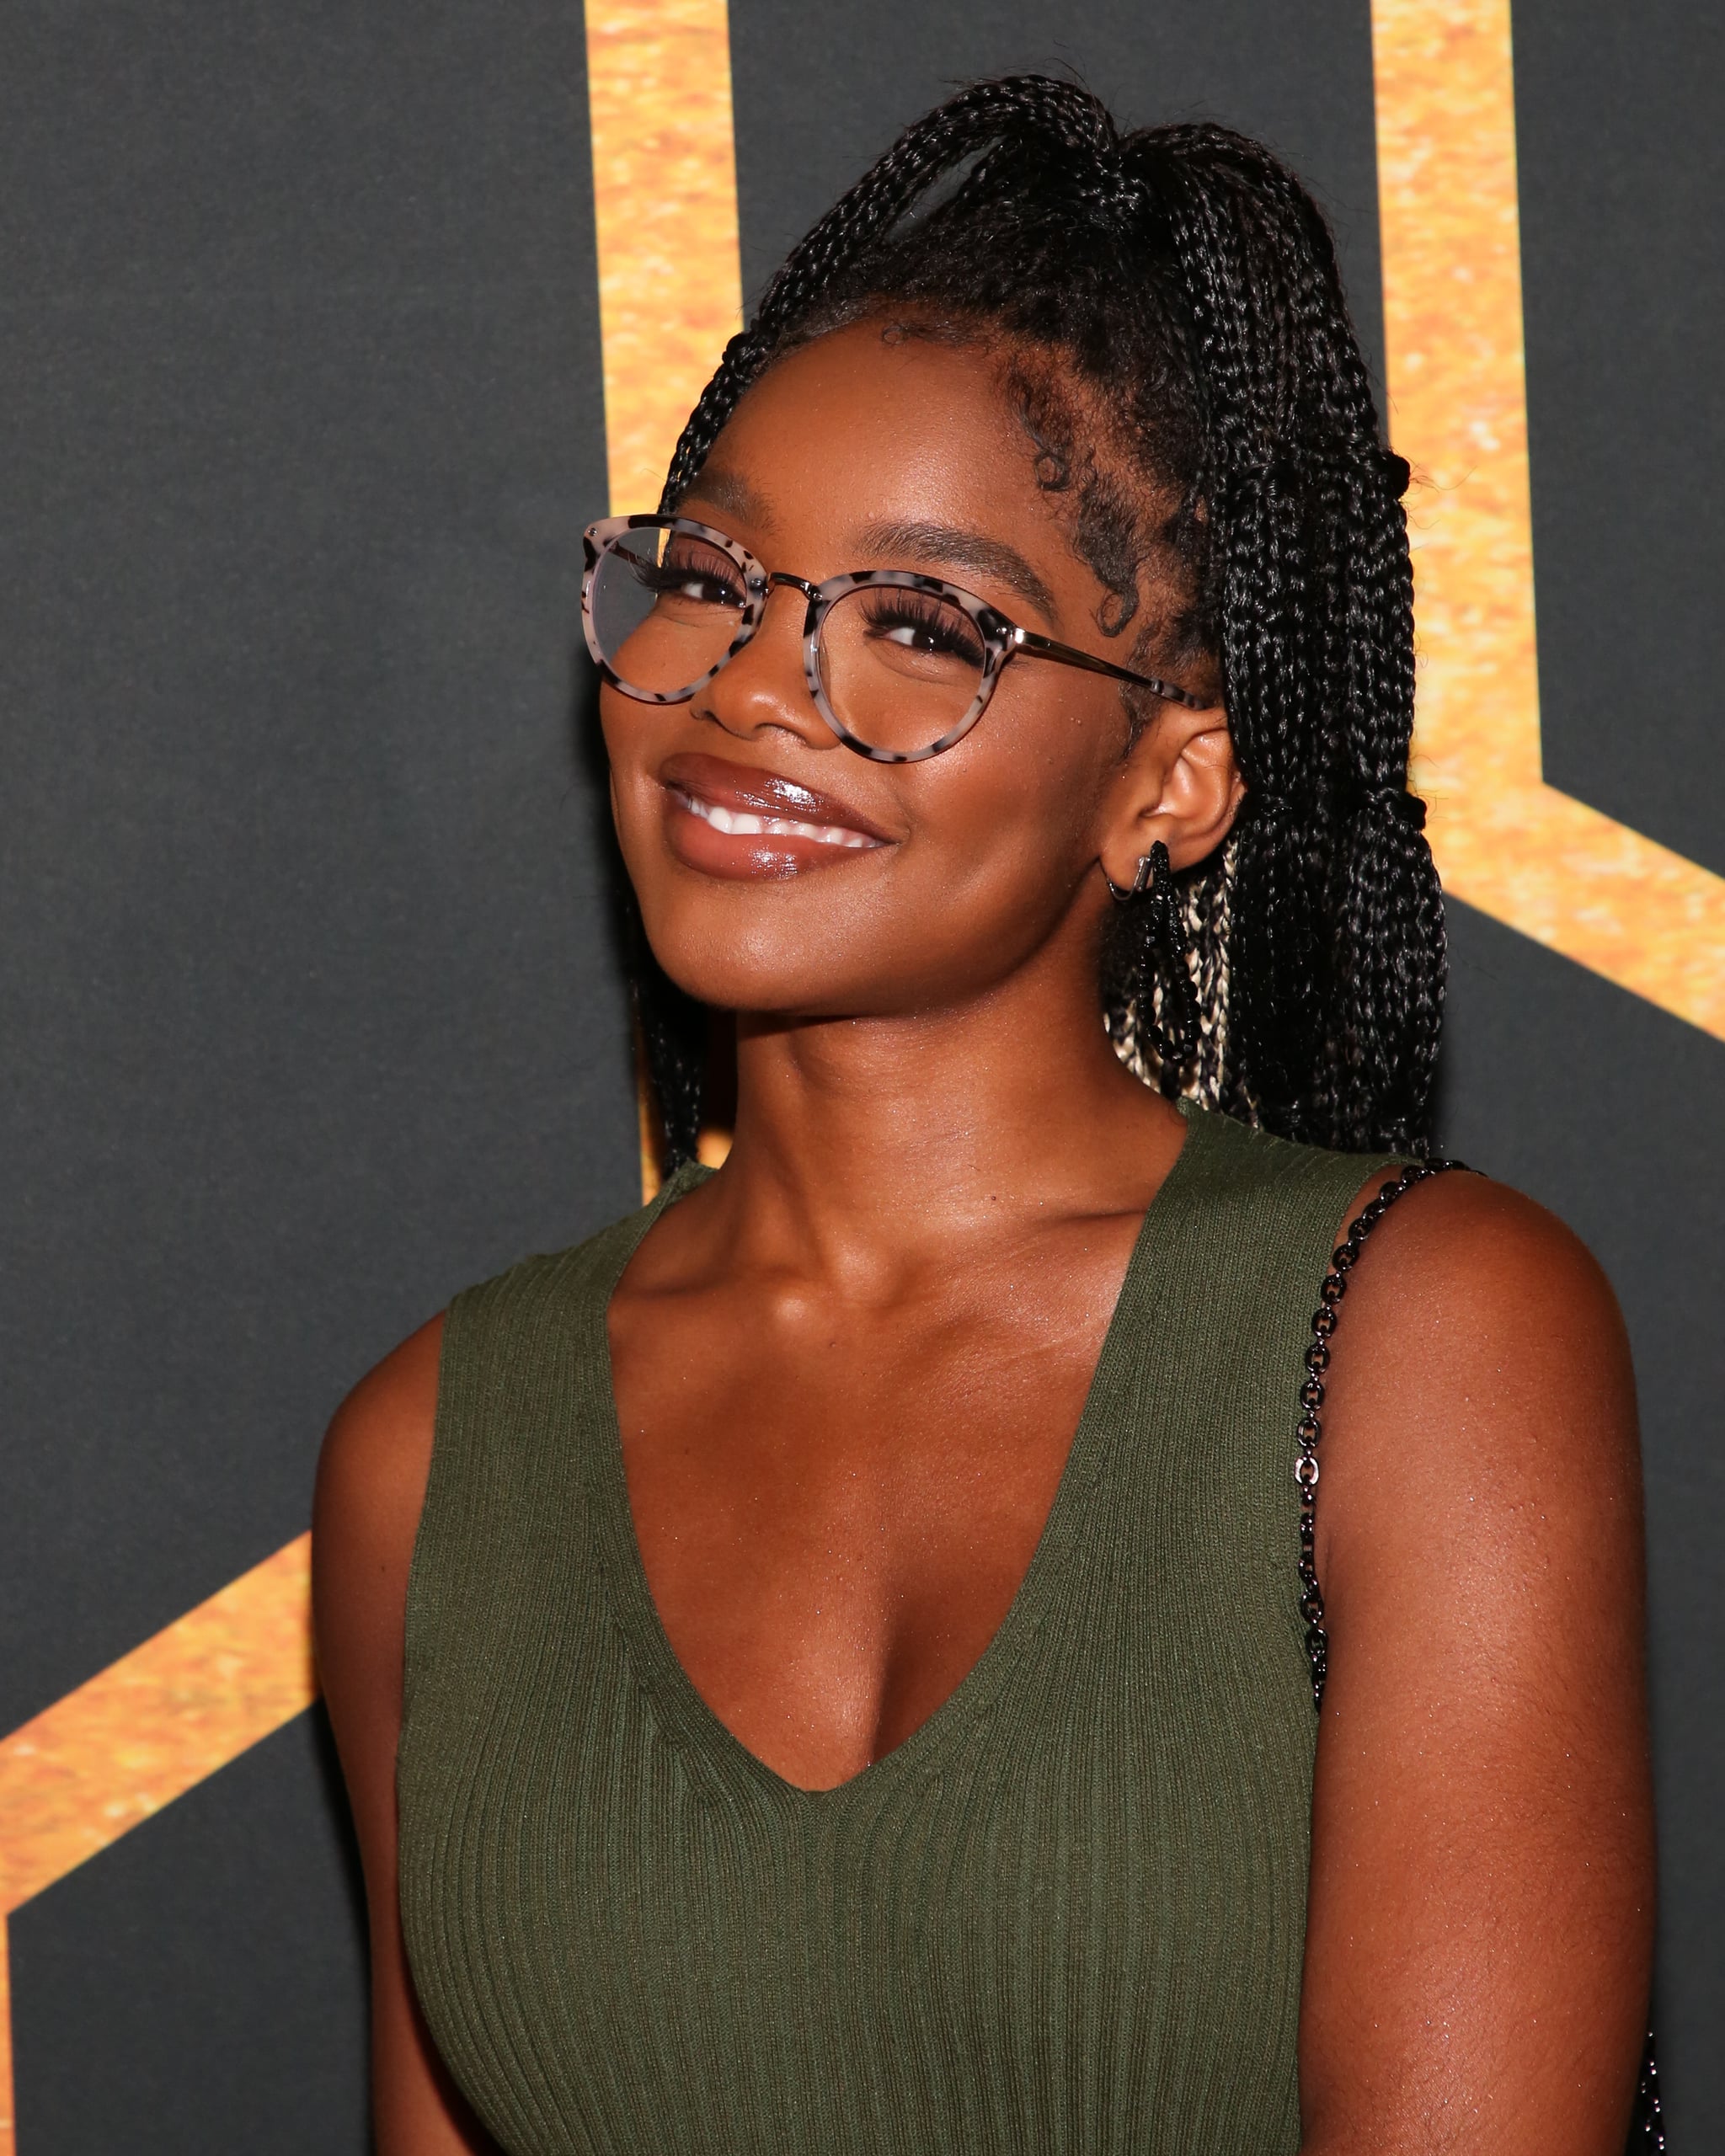 WEST HOLLYWOOD, CALIFORNIA - JULY 20: Actress Marsai Martin attends the Stephen Curry 2022 ESPYs celebration at LAVO Ristorante on July 20, 2022 in West Hollywood, California. (Photo by Paul Archuleta/Getty Images)